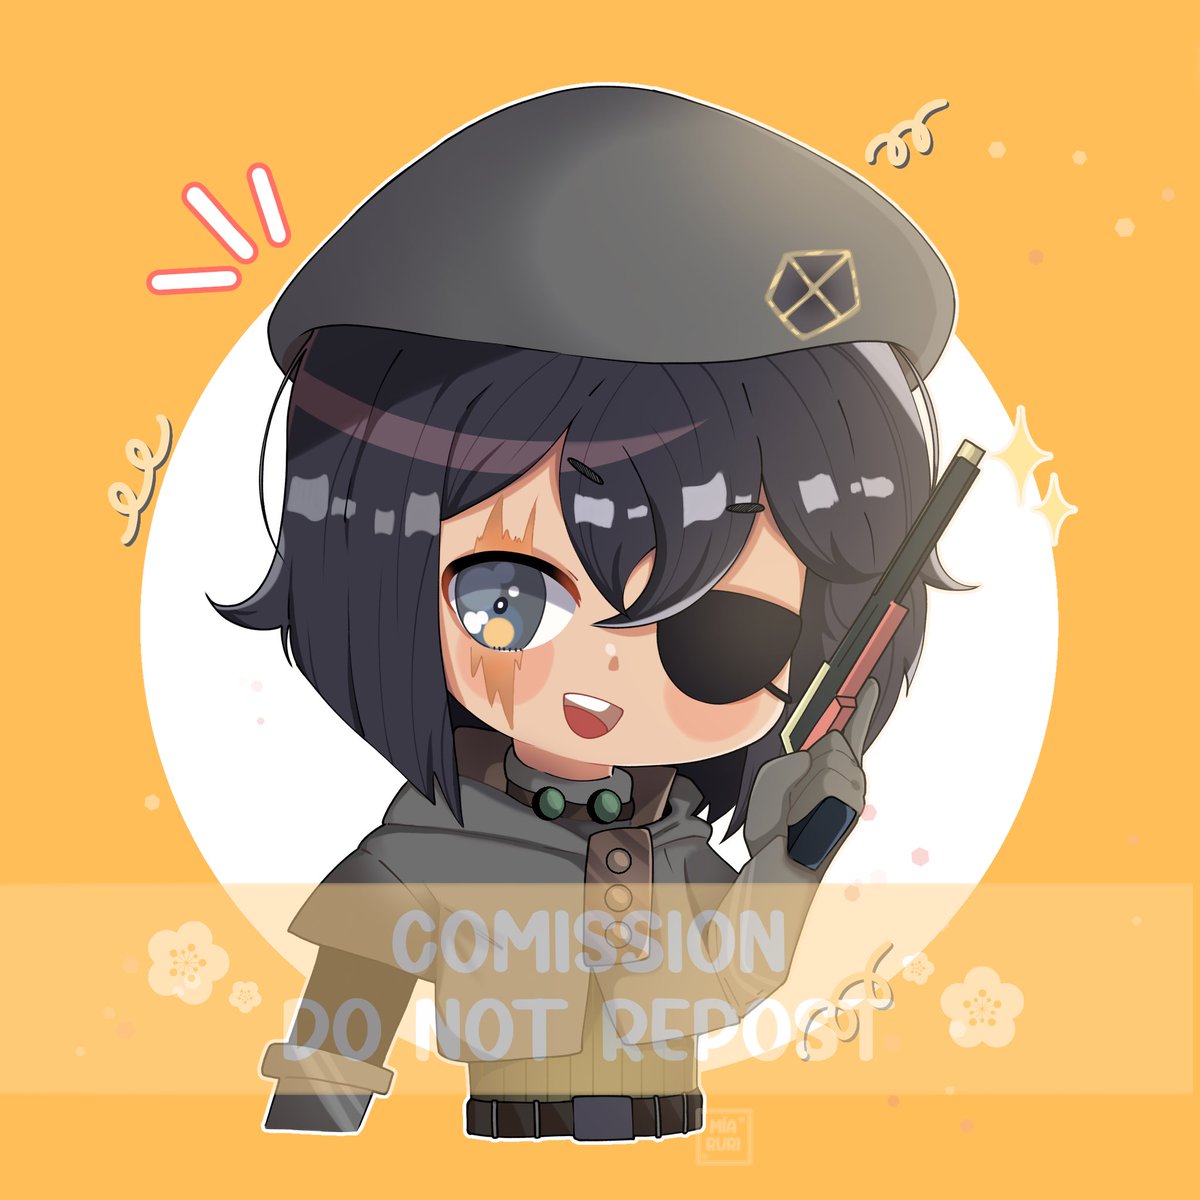 ✨COMISSION DONE✨

He is so cute, I love drawing him, what do you guys think about it?

#chibicomissions #ComisionesAbiertas #art #comissionsopen